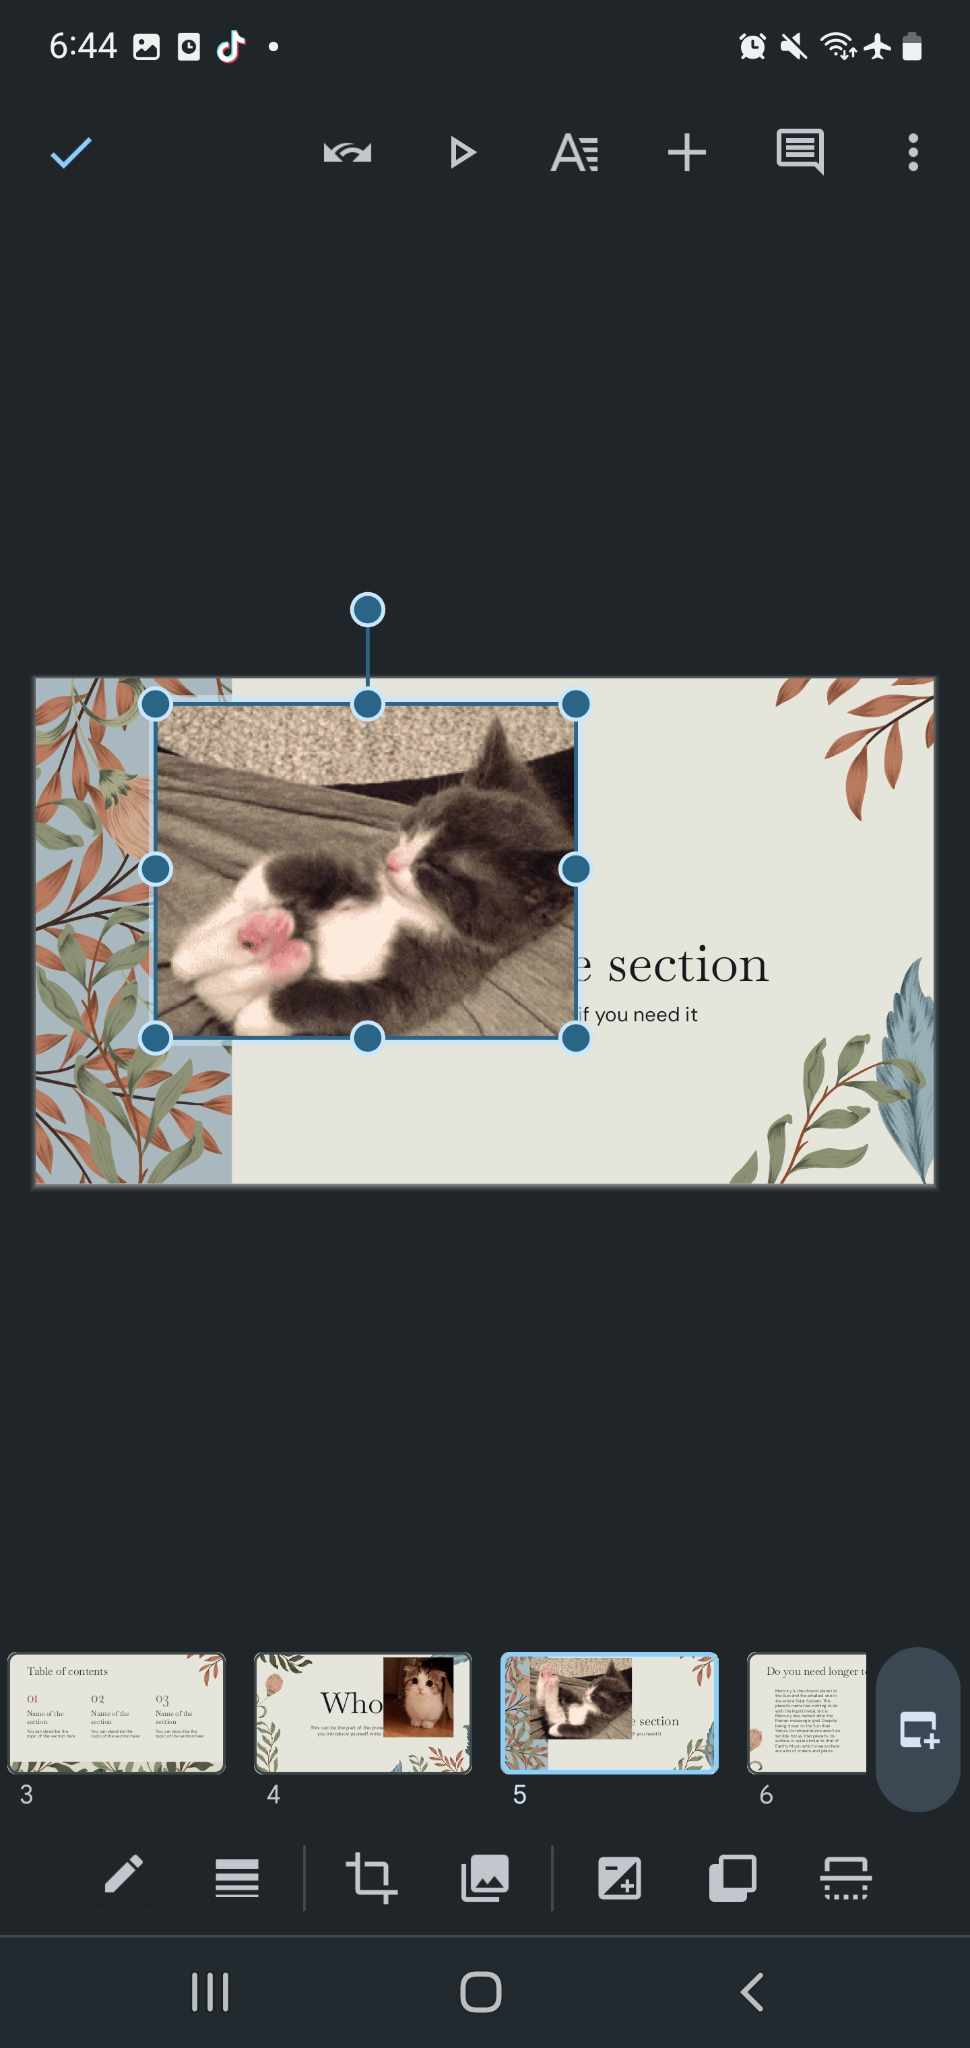 Successful GIF uploaded to Google Slides mobile